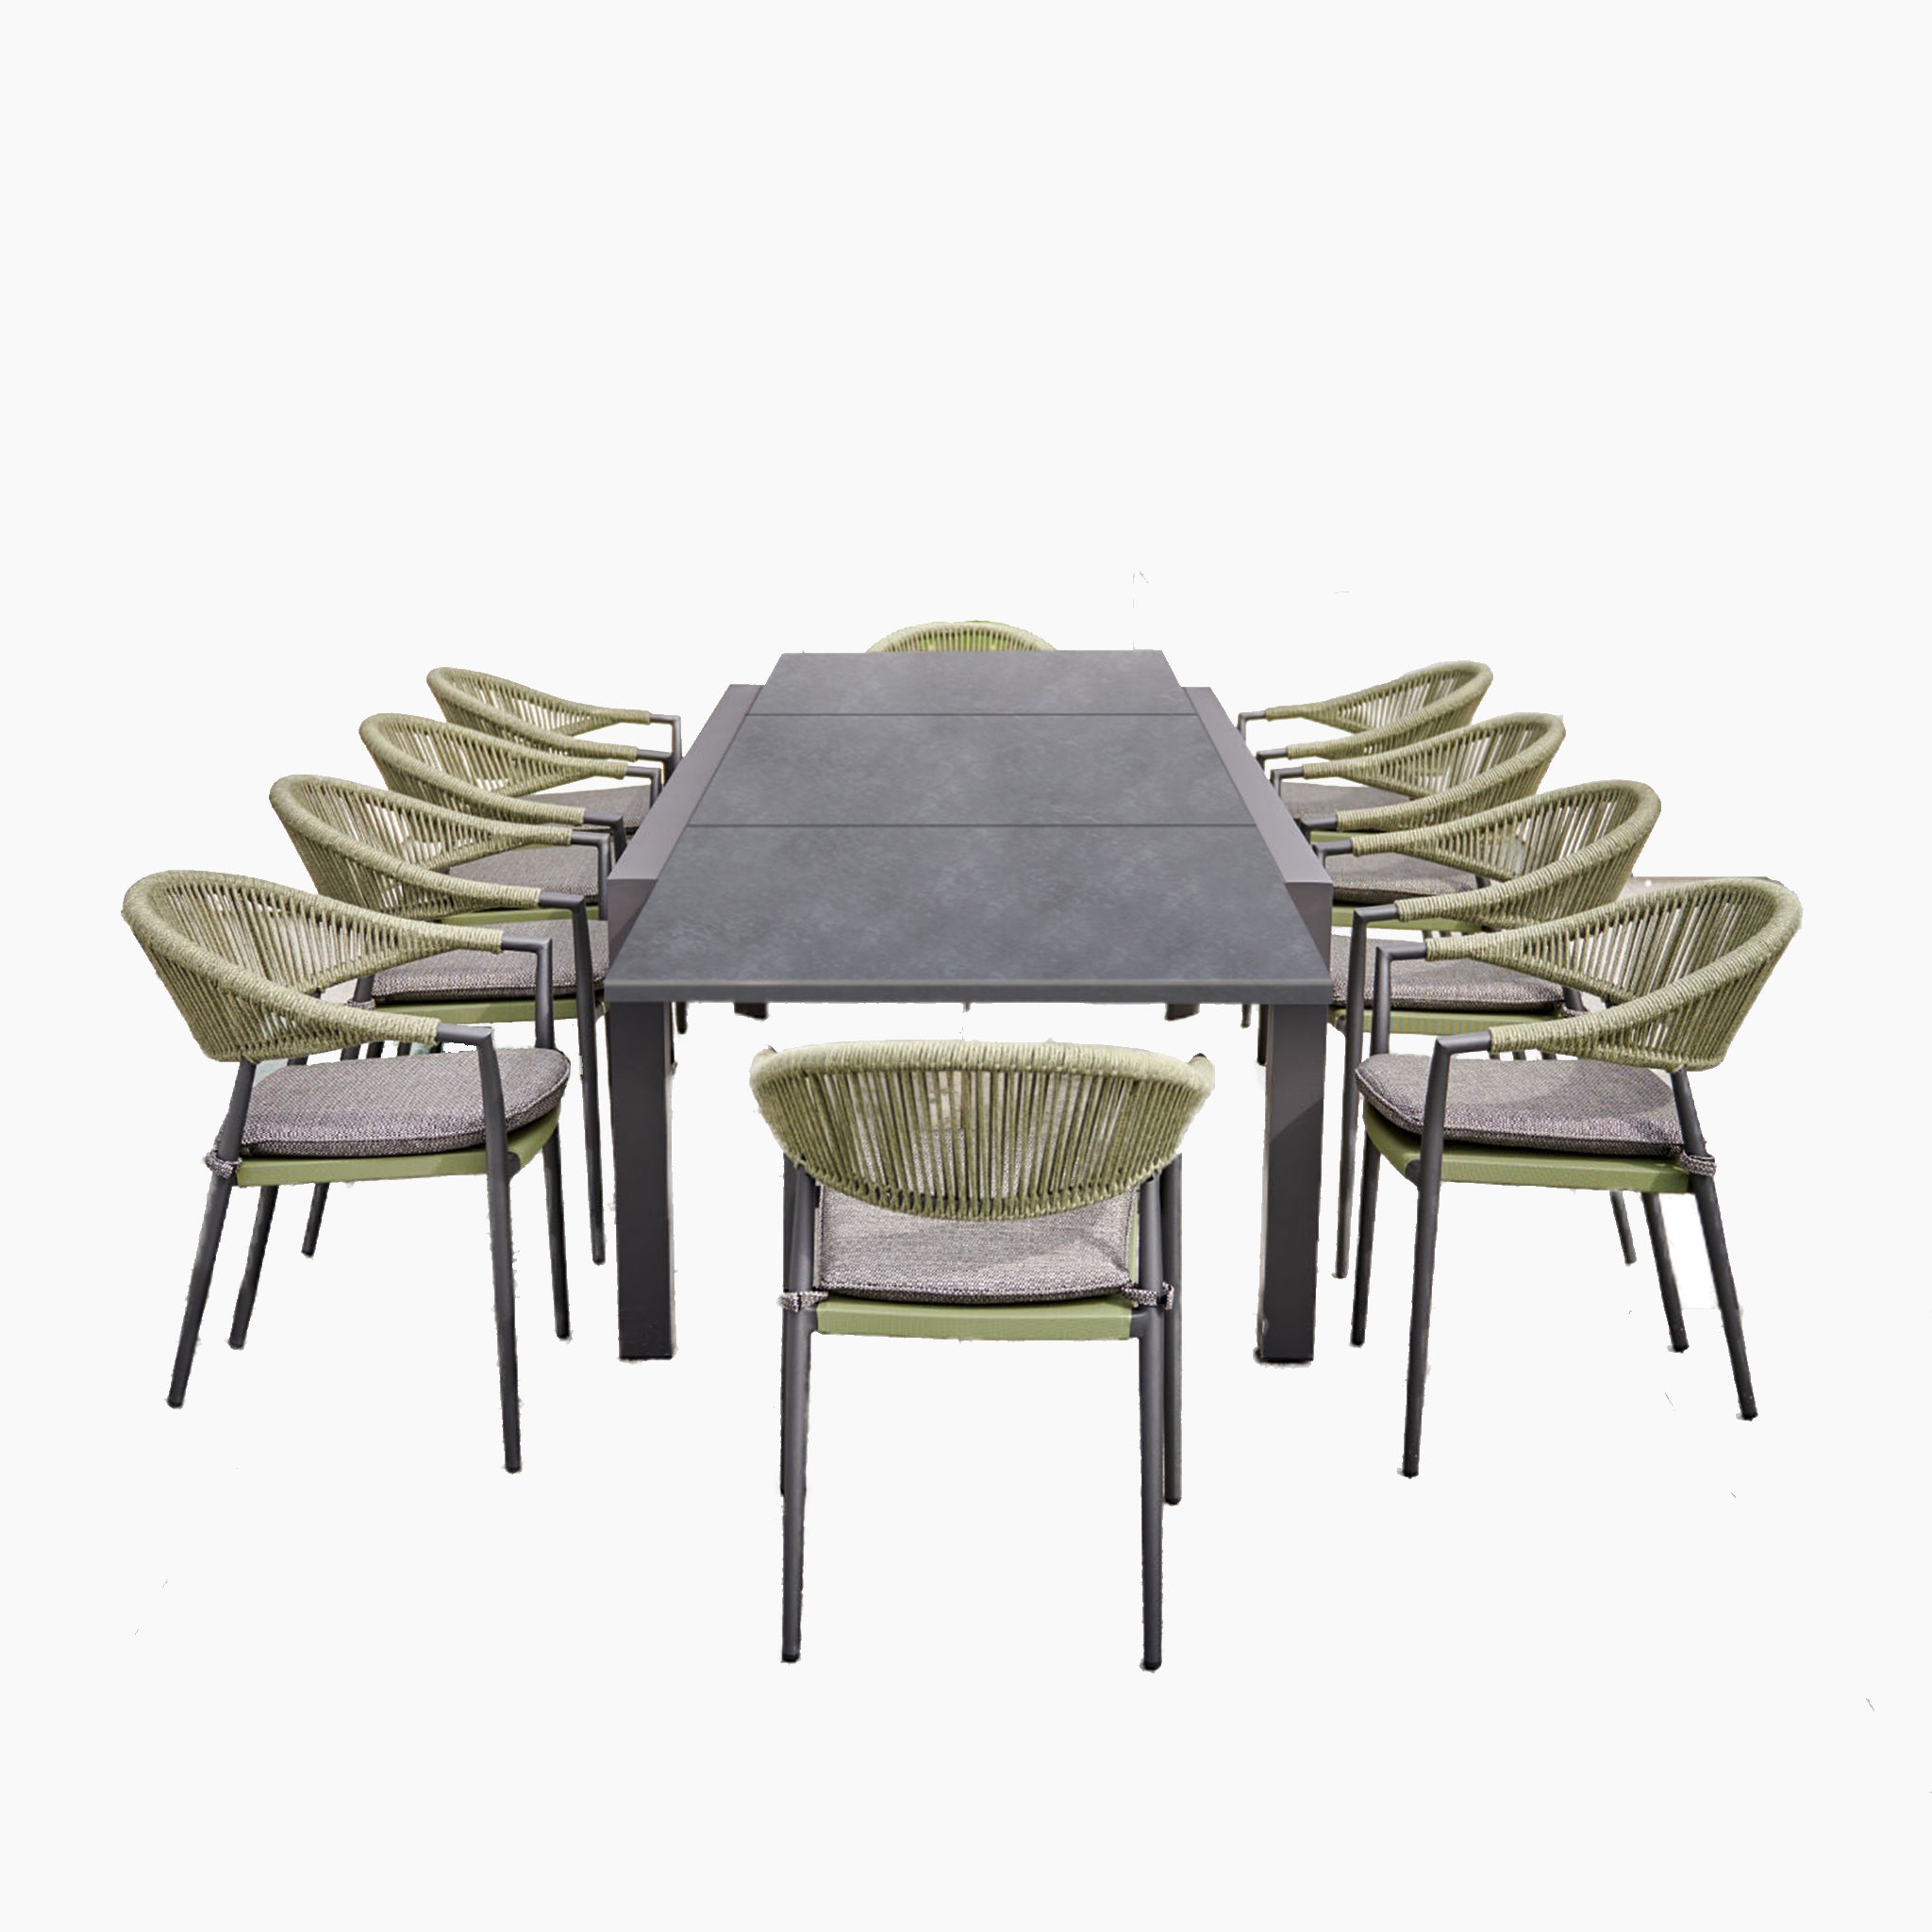 Cloverly 10 Seat Rectangular Extending Dining Set with Ceramic Table in Olive Green